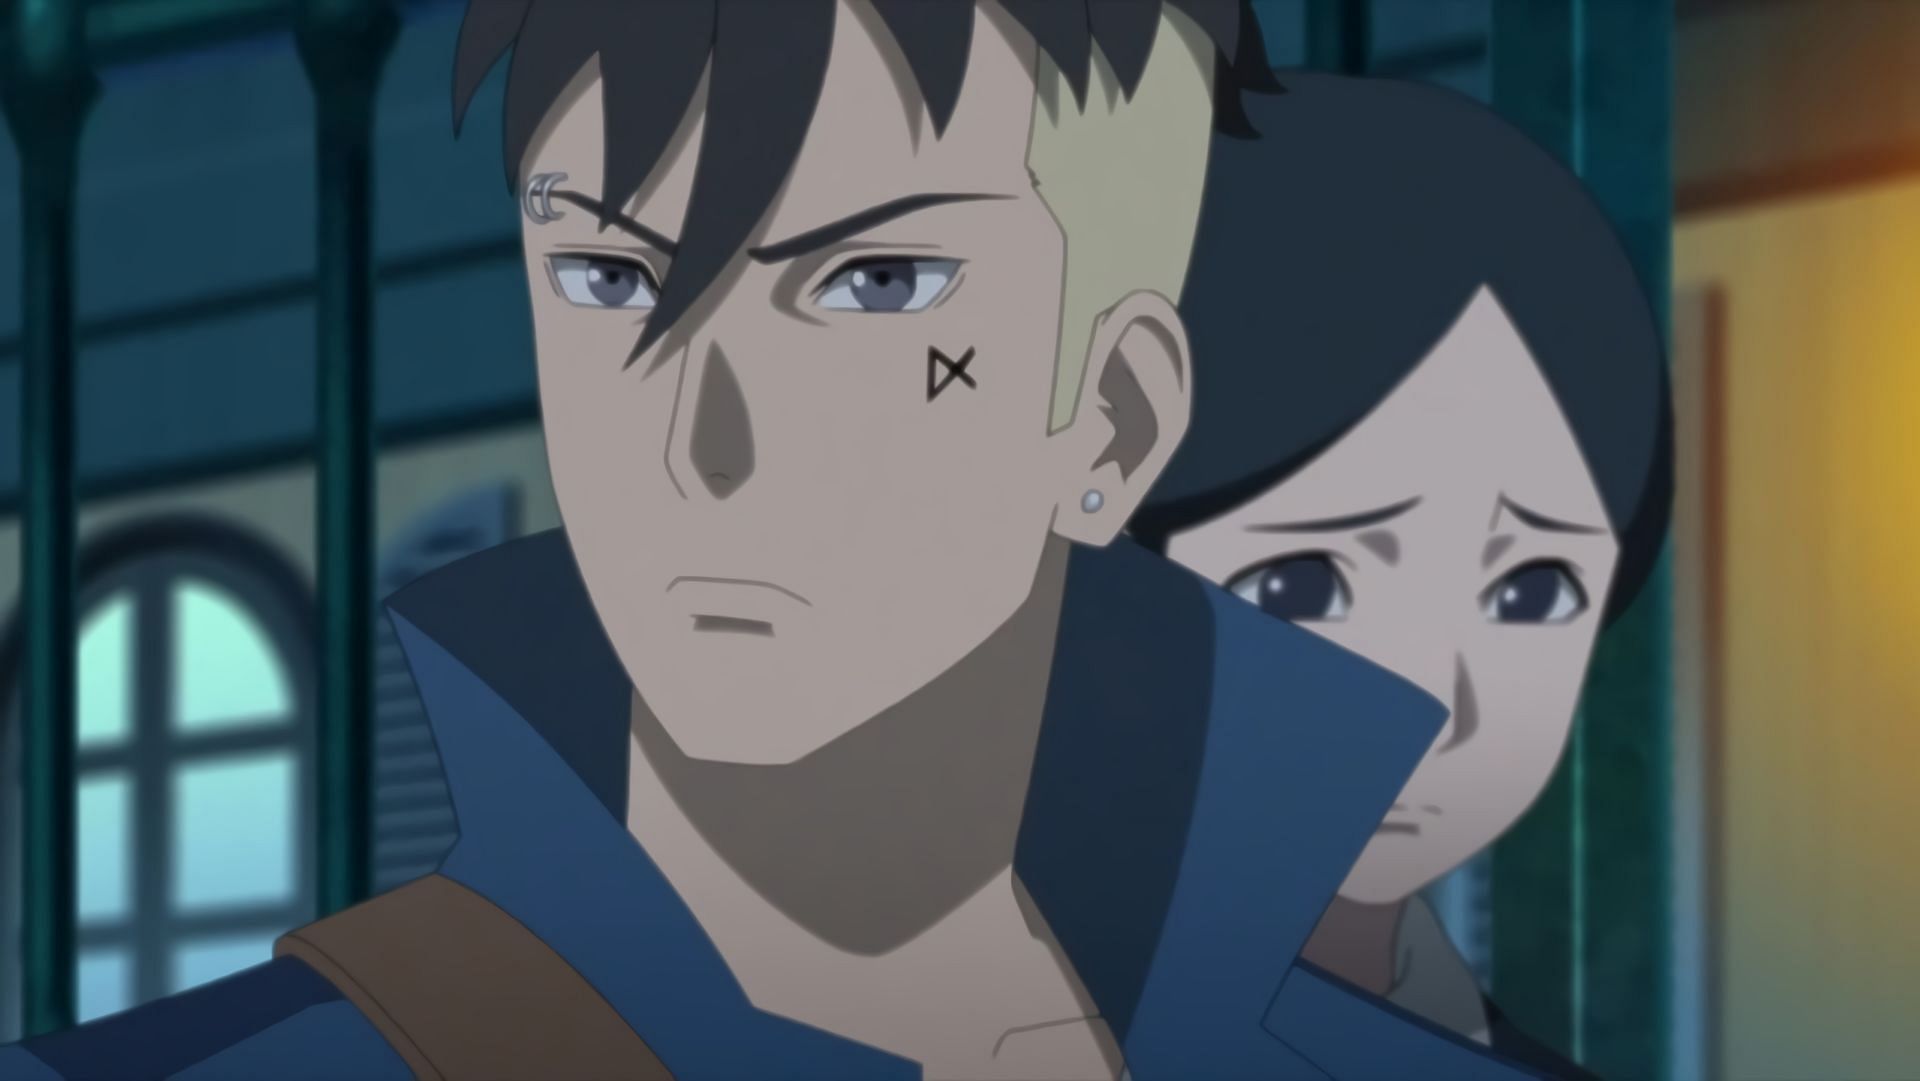 BORUTO EPISODE 289 - Himawari's enemy has arrived, they shocked to see Kid  with overpowered strength 